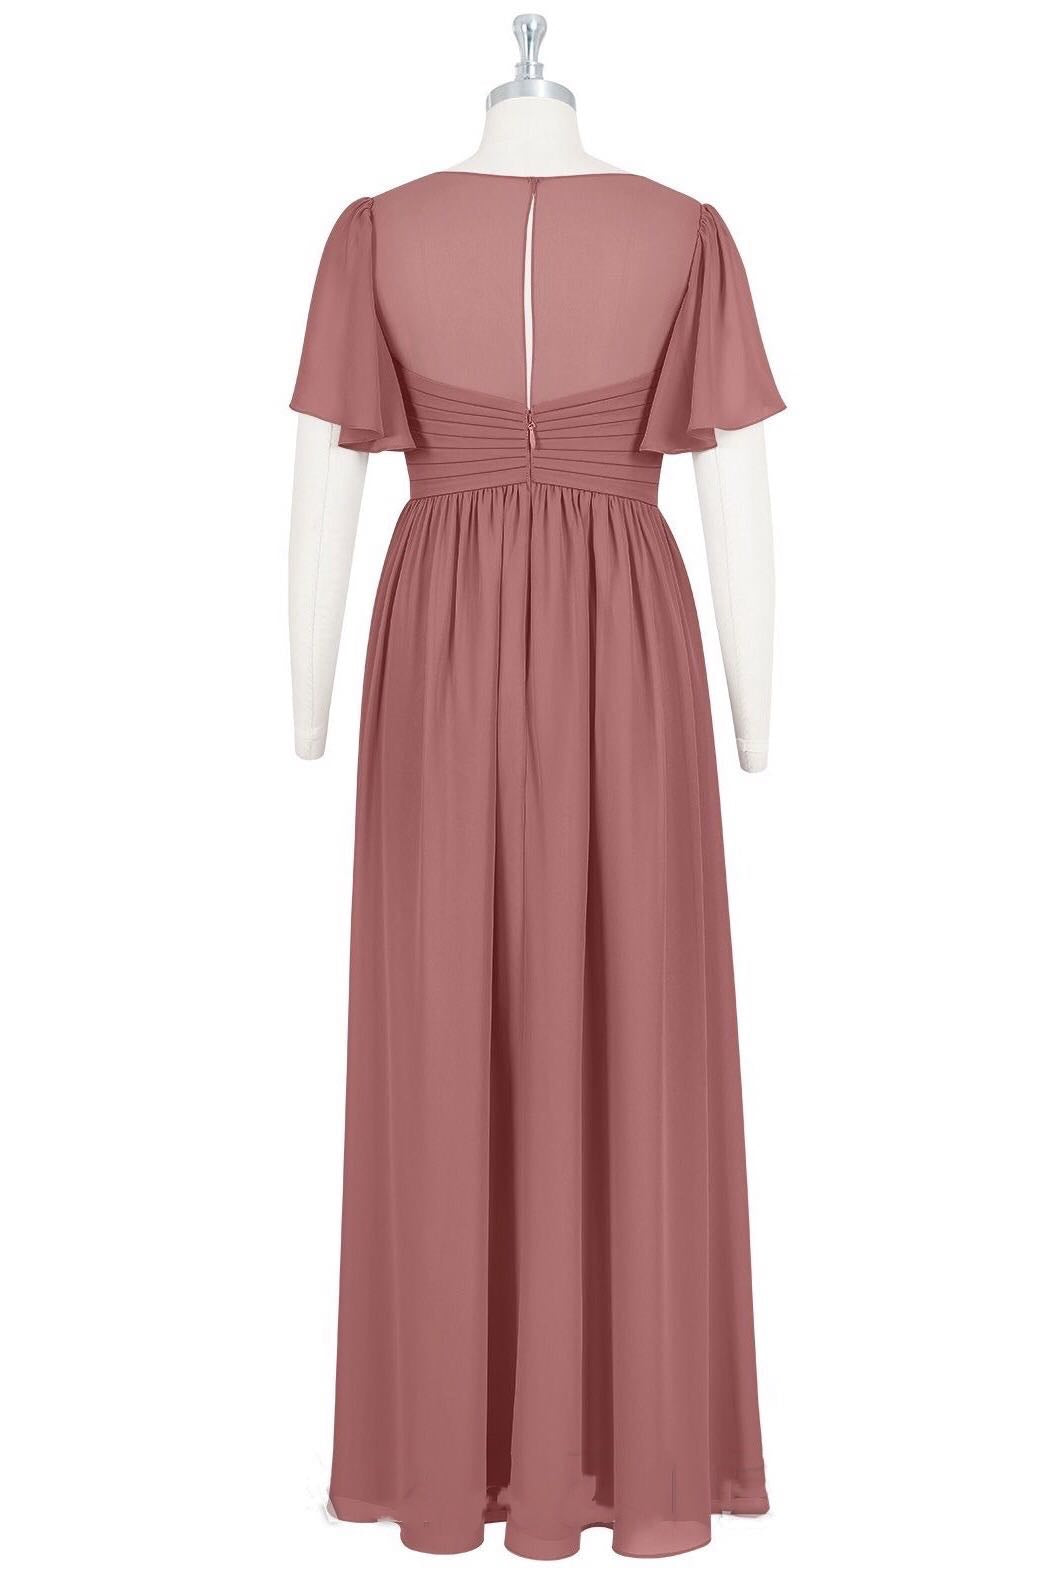 Dusty Pink V Neck Butterfly Sleeves Chiffon Long Bridesmaid Dress